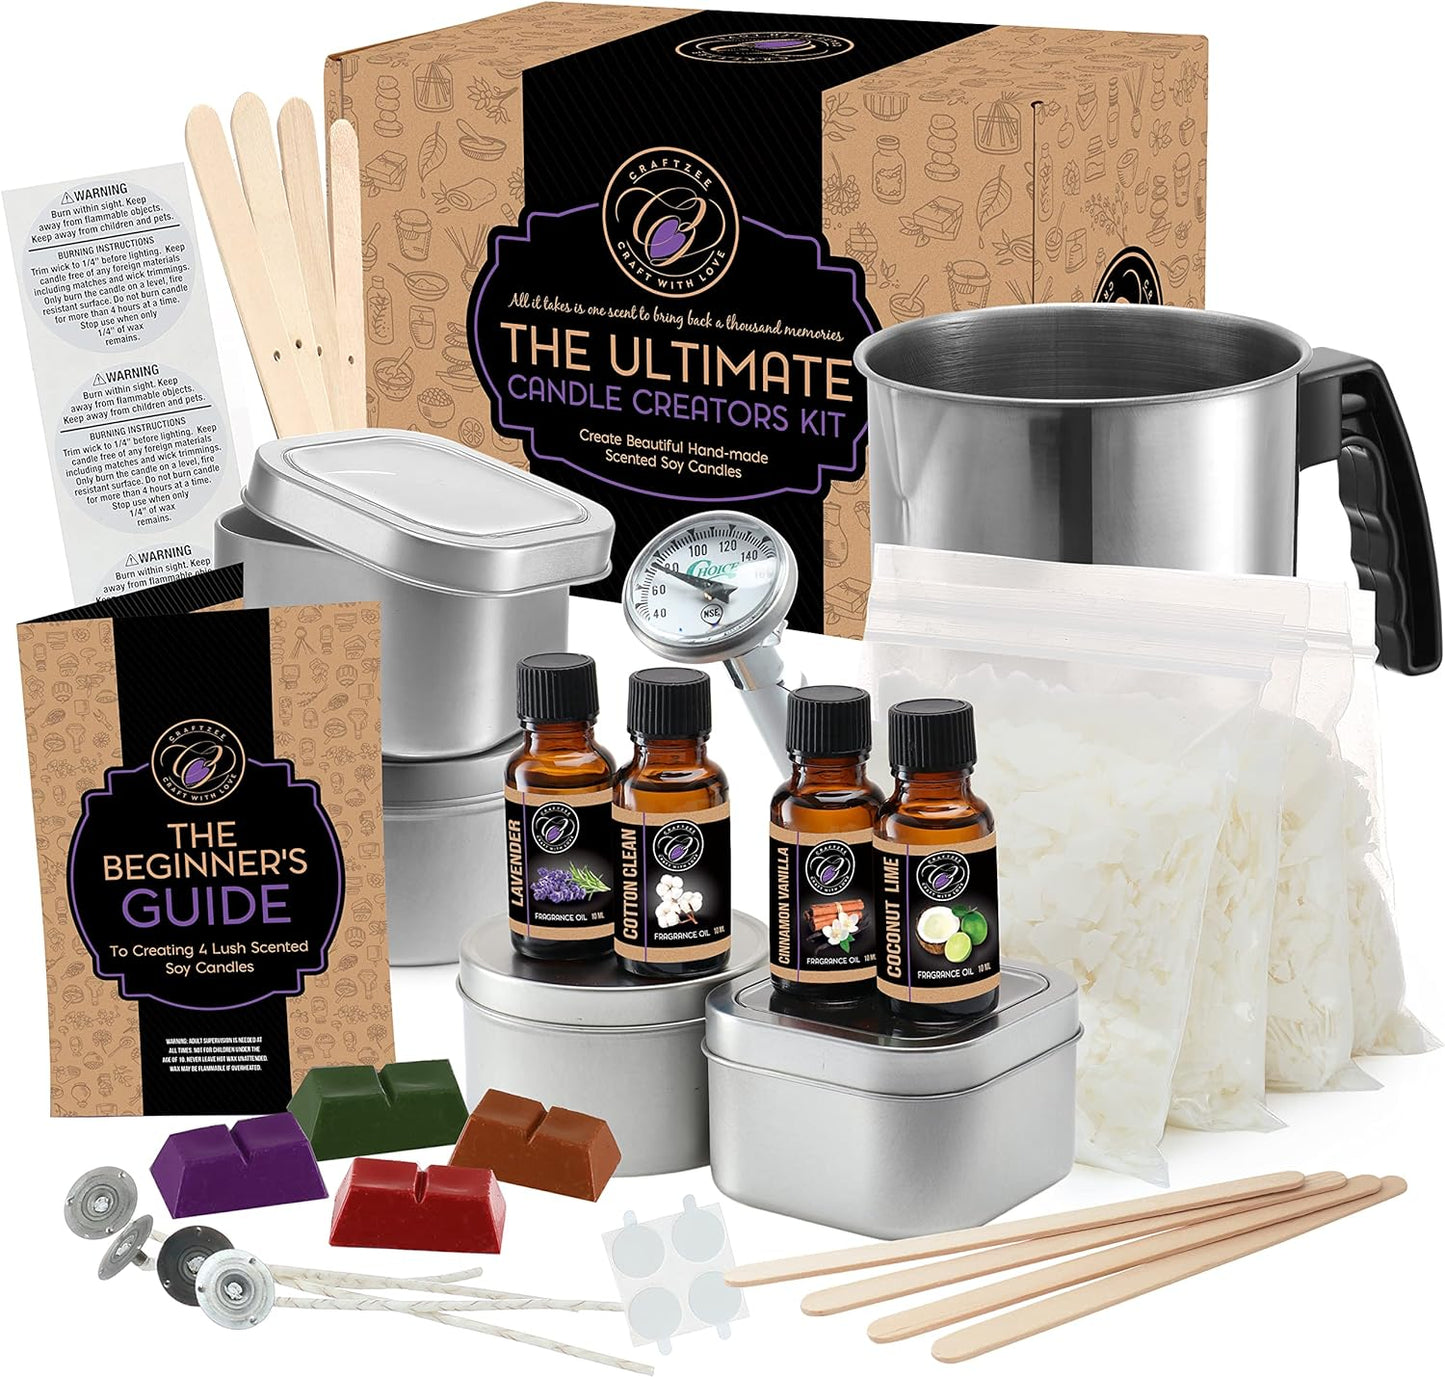 The Ultimate Candle Creators Kit with Soy Wax, Fragrance Oils, Wicks, Dyes, Tins, Melting Pot & More